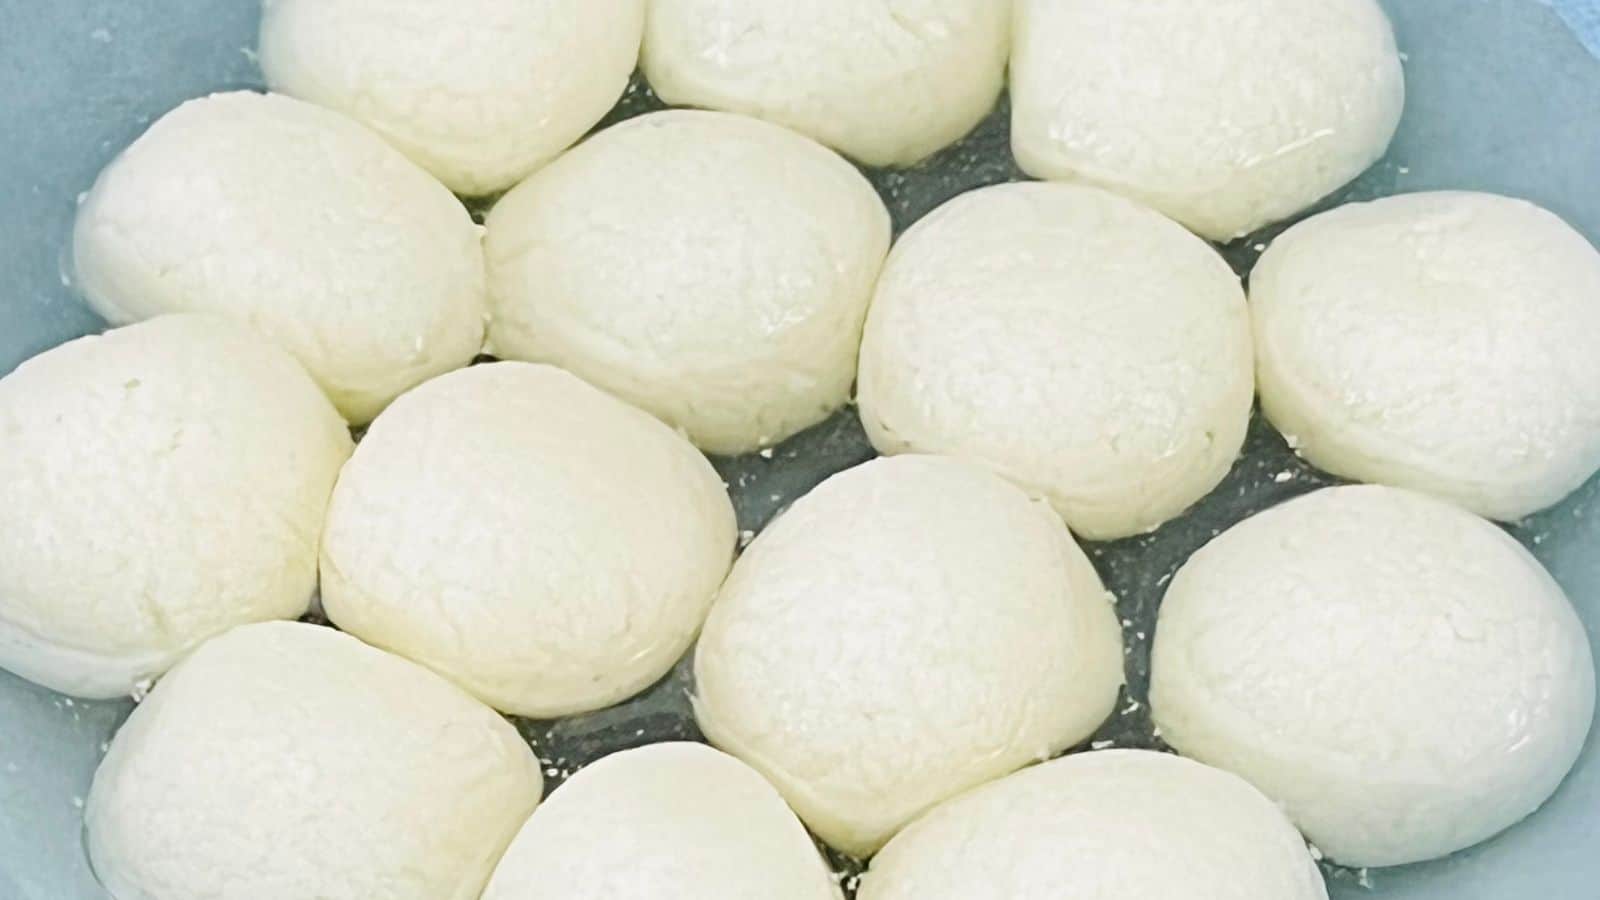 A bowl filled with round, white dough balls close together, likely for baking or cooking.